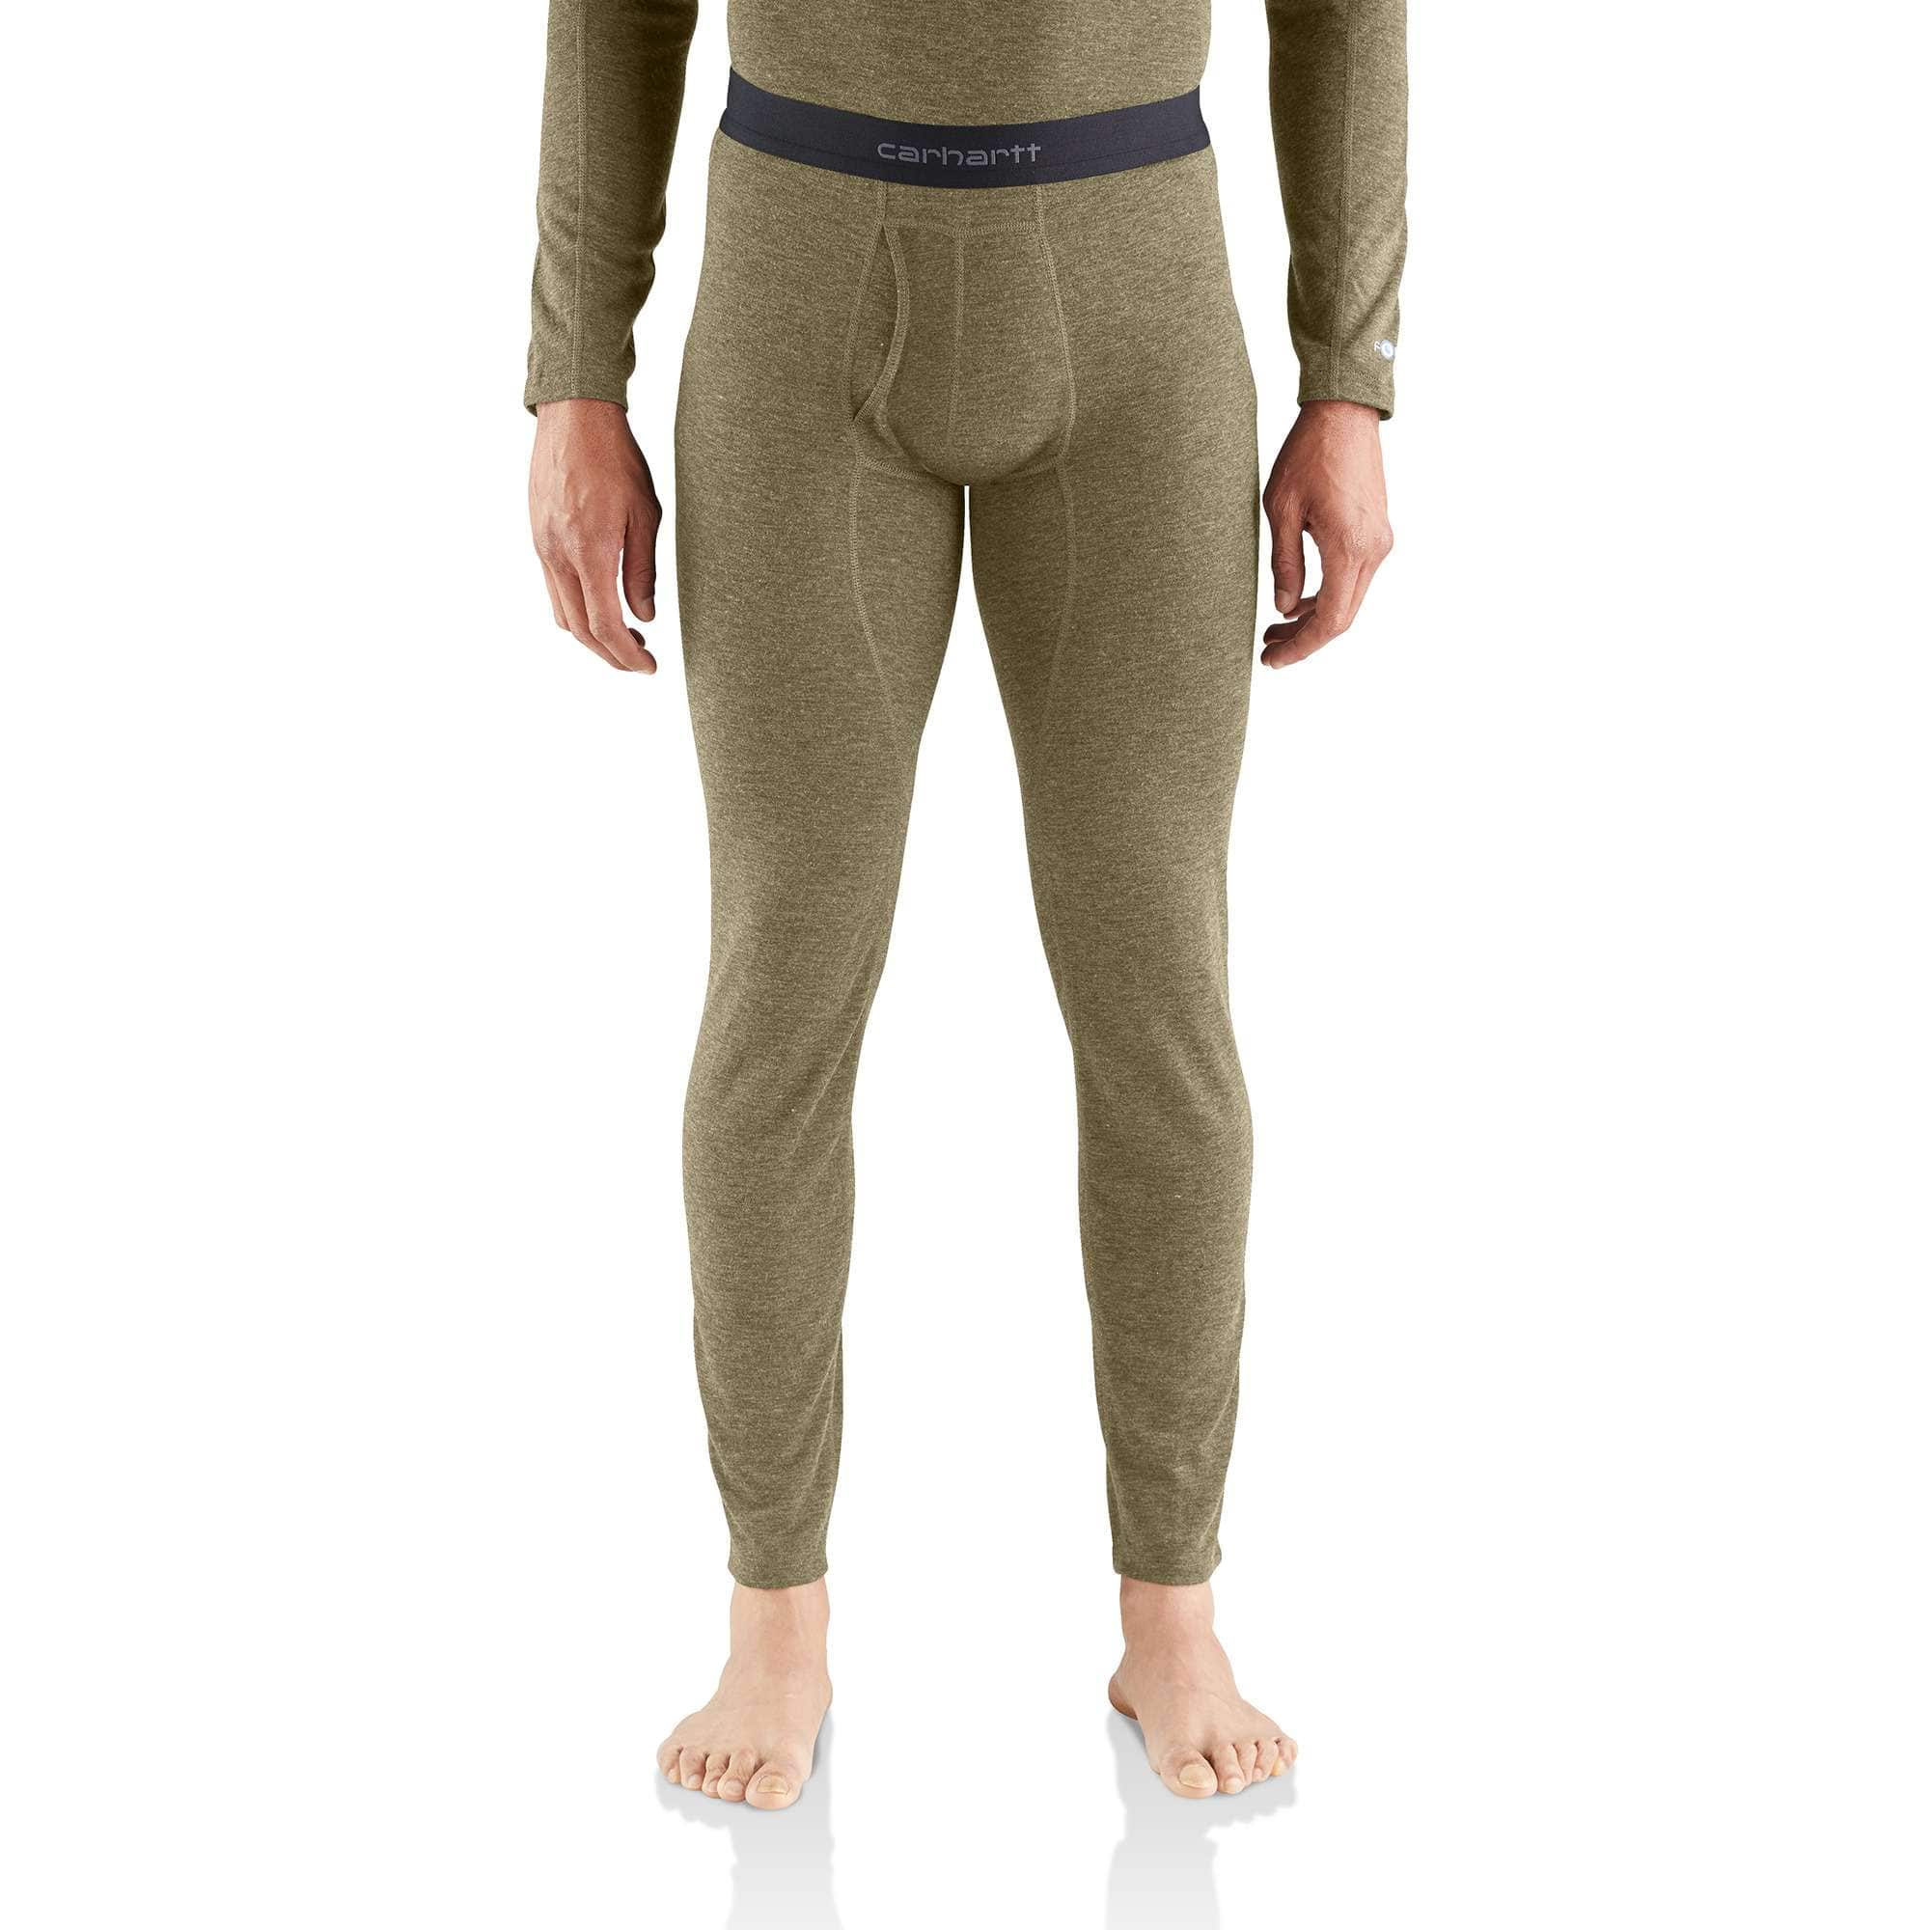 Buy WEERTI Thermal Underwear for Men, Long Johns for Men with